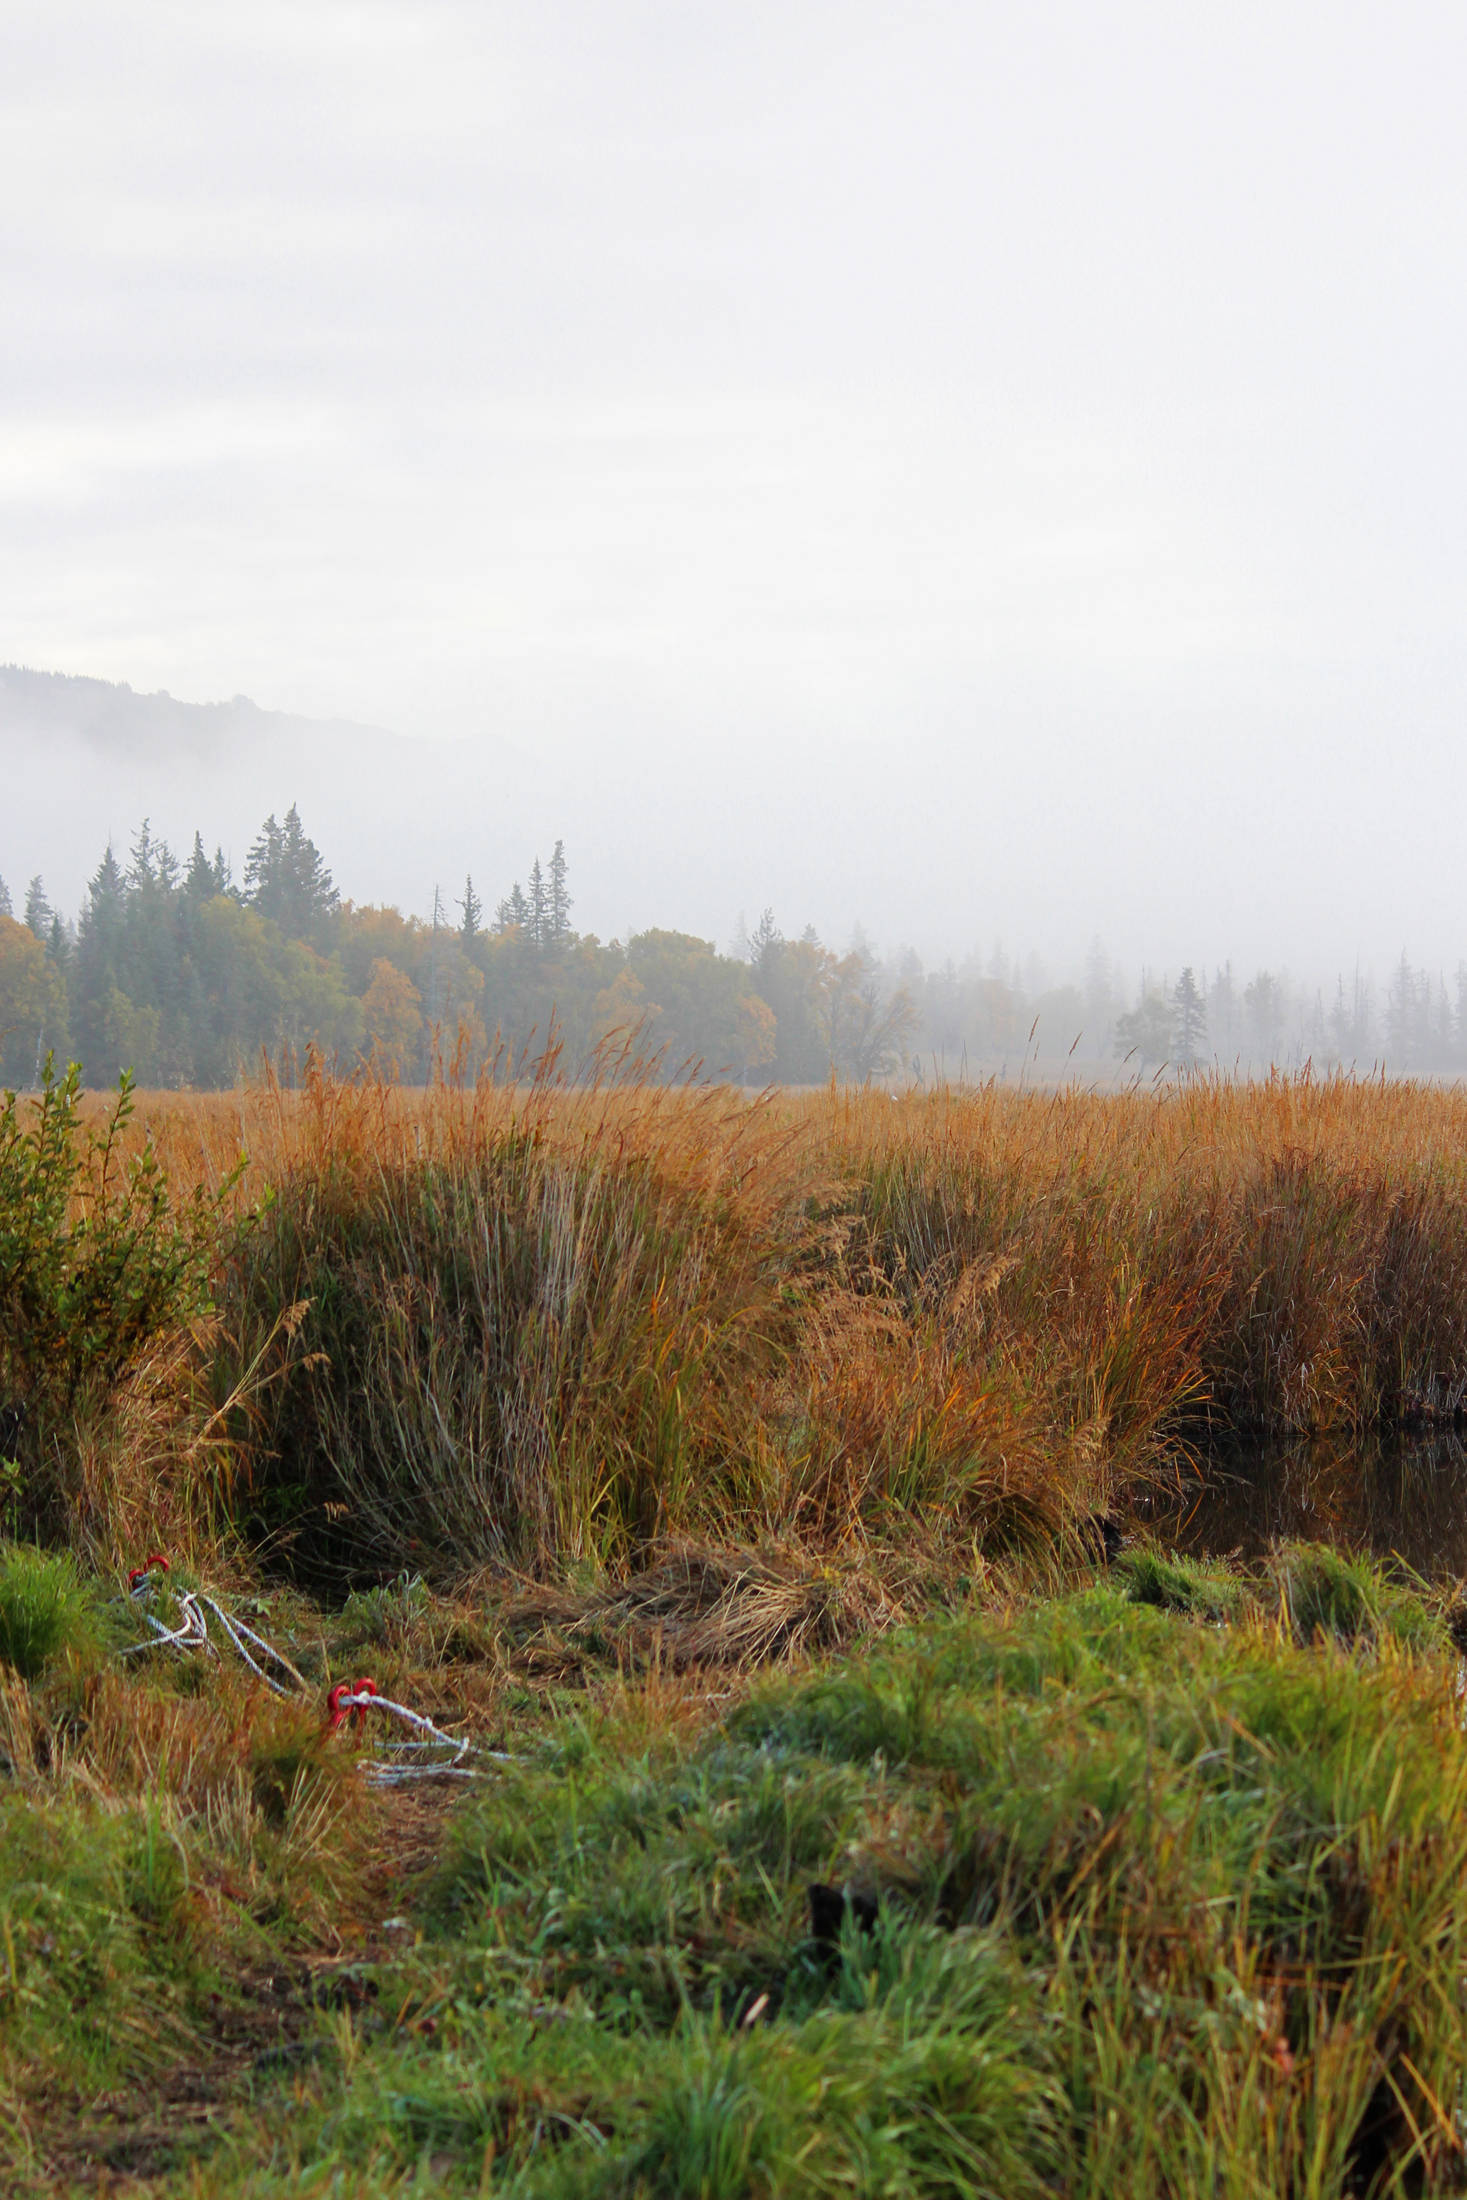 Trees along Beluga Lake disappear into fog and grasses turn to orange on Wednesday, Sept. 19, 2018 in Homer, Alaska. Much of Homer and the surrounding area was enveloped in a quiet blanket of fog that morning as fall made its presence known. (Photo by Megan Pacer/Homer News)